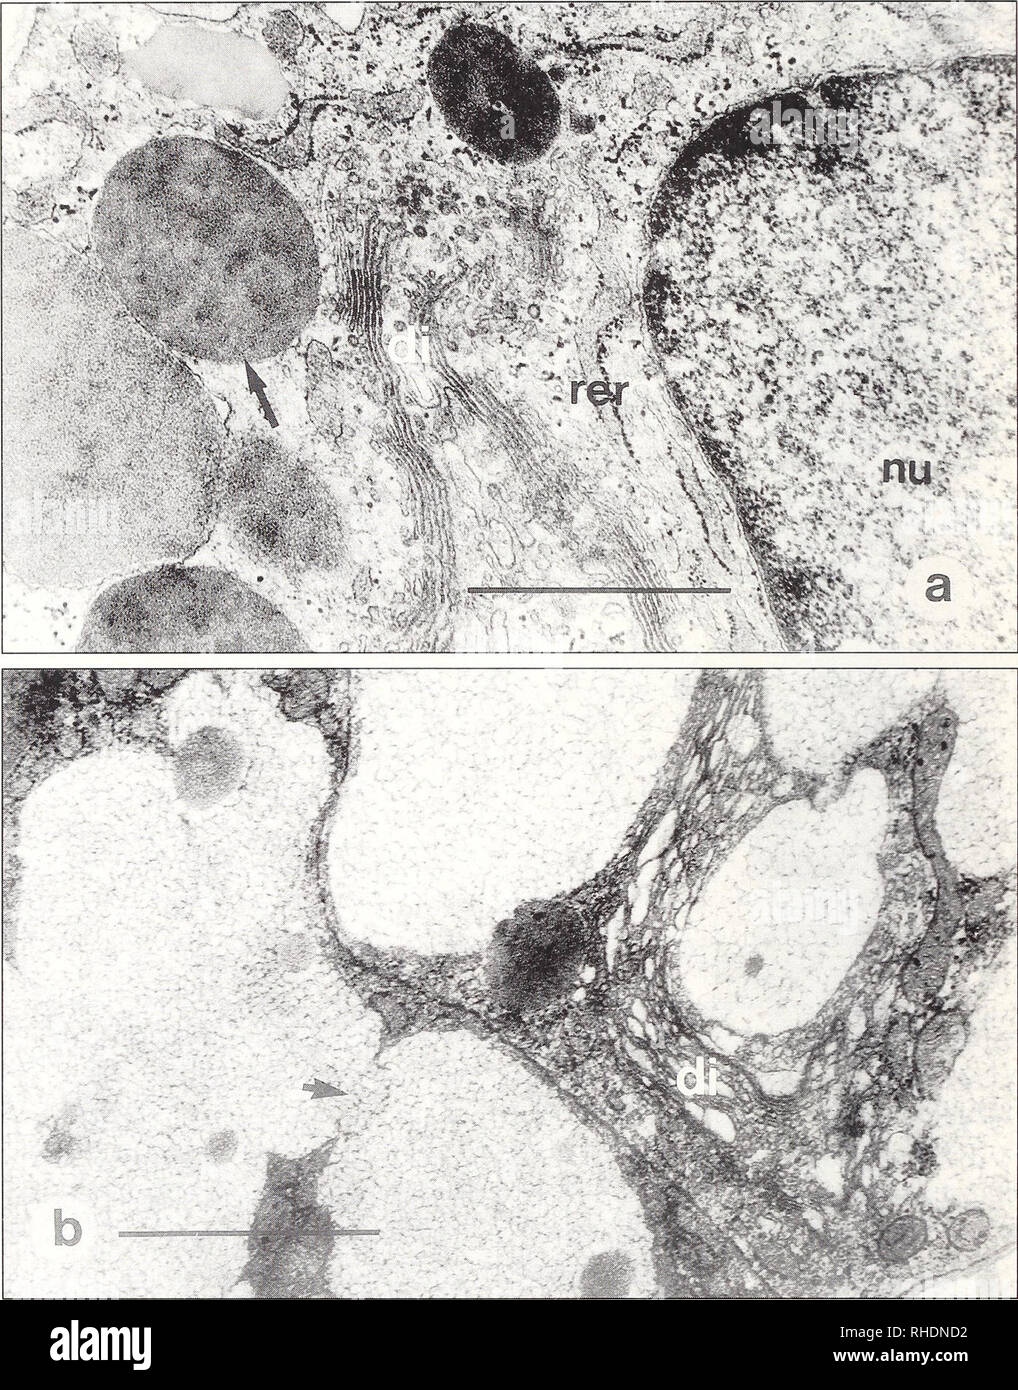 . Bonner zoologische Monographien. Zoology. 42. Fig. 9 a, b. Fine structure of gland cells in the pars convoluta. a Seromucous gland cell of the second subdivision (middle part) of the pars convoluta of Salamandra atra. Note the compact osmiophilic secretory granules (arrow), dictyosomes (di) and the well developed rough endoplasmic reticulum (rer). Nucleus (nu). Bar 1 |im. b Mucous gland cell of the first subdivision of the pars convoluta of Triturus alpestris. Note the confluent secretory granules (arrow) and the large dictyosome (di). Bar 1 }im.. Please note that these images are extracted  Stock Photo